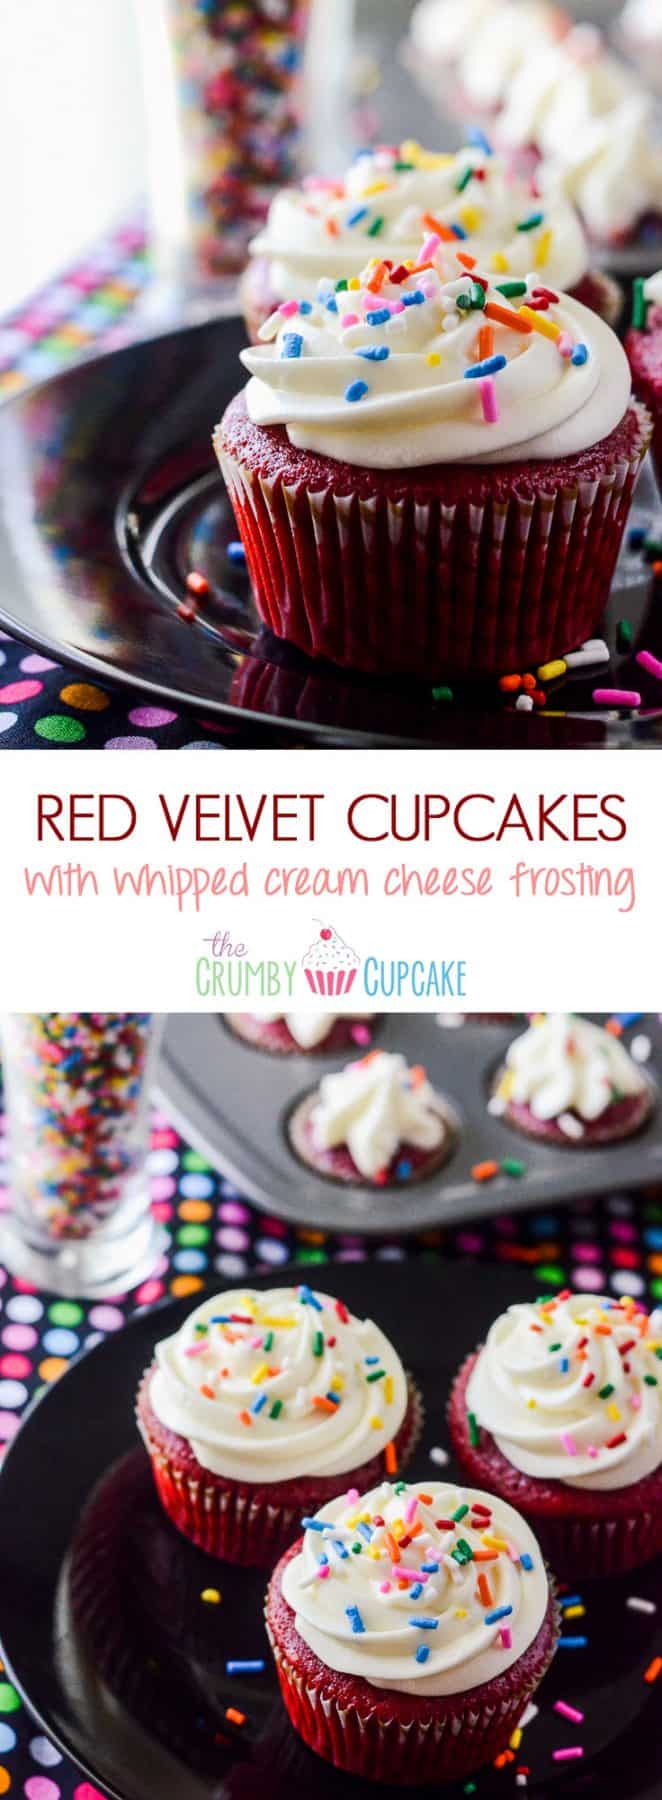 Red Velvet Cupcakes with Whipped Cream Cheese Icing | Literally the best Red Velvet Cupcake recipe in the entire world! Moist and flavorful, you can actually taste the chocolate & vanilla notes in the classic buttermilk batter.